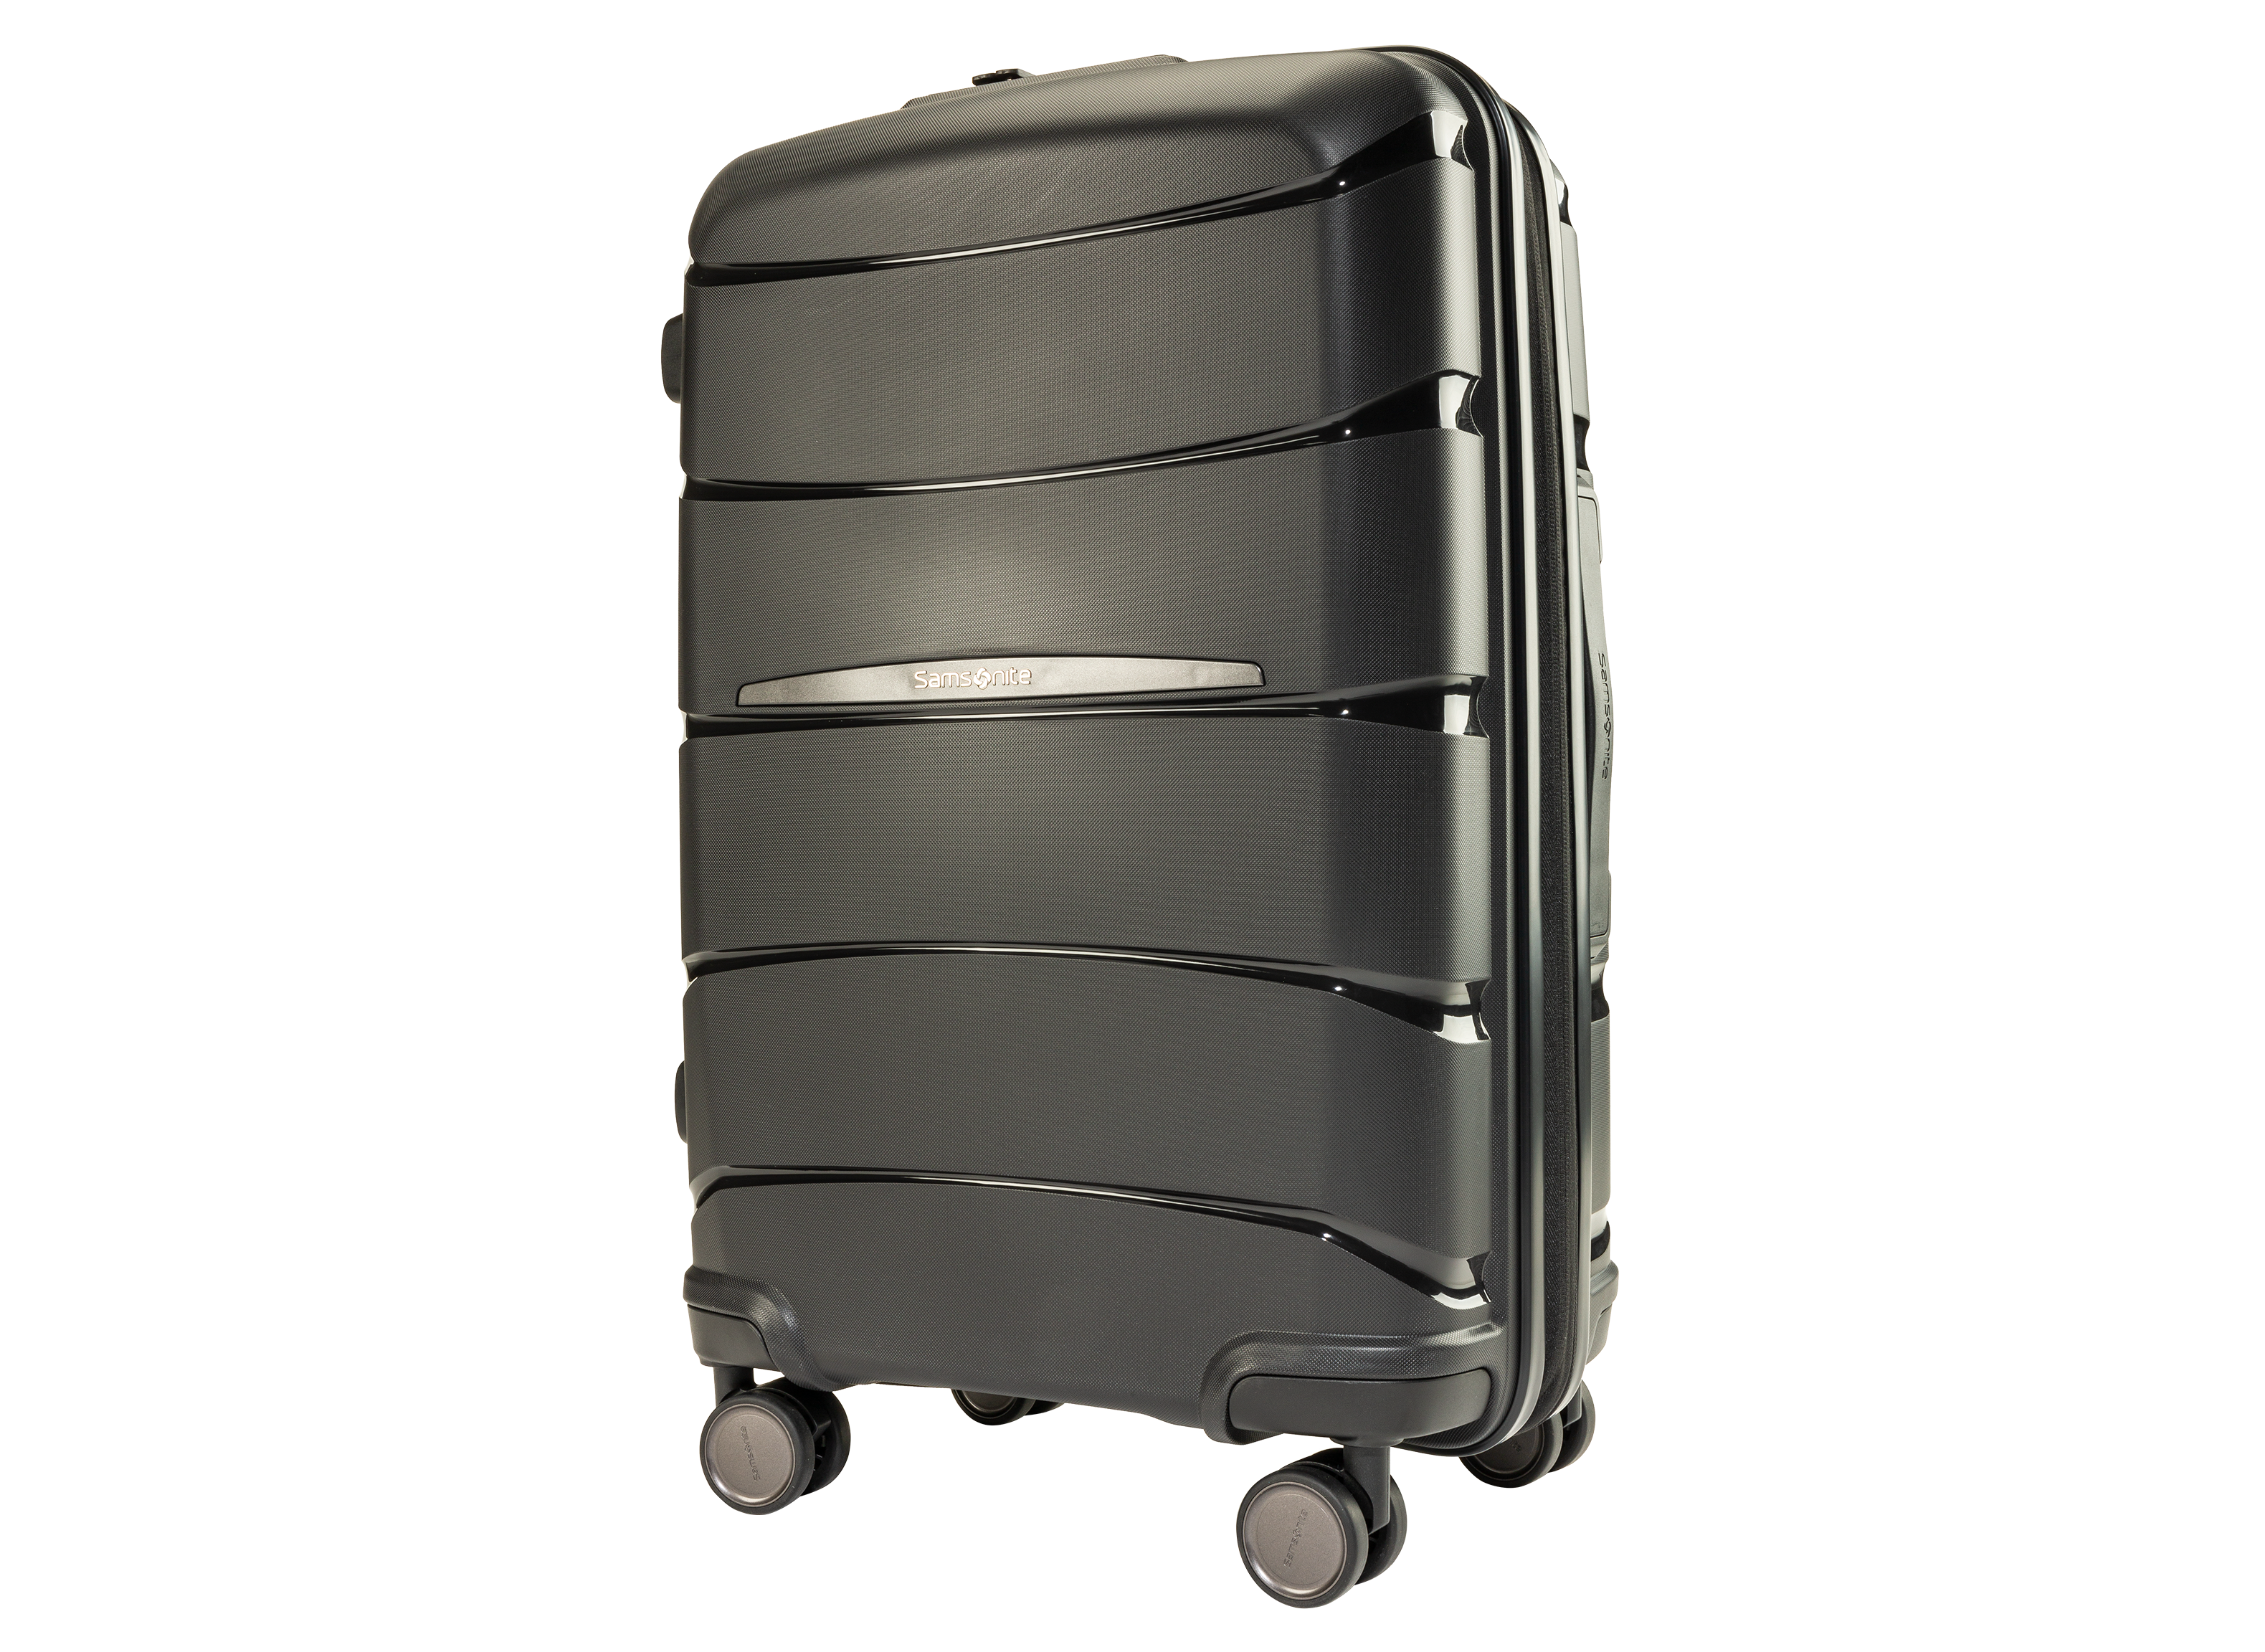 Carry On Pro, Hard Shell Carry On Luggage